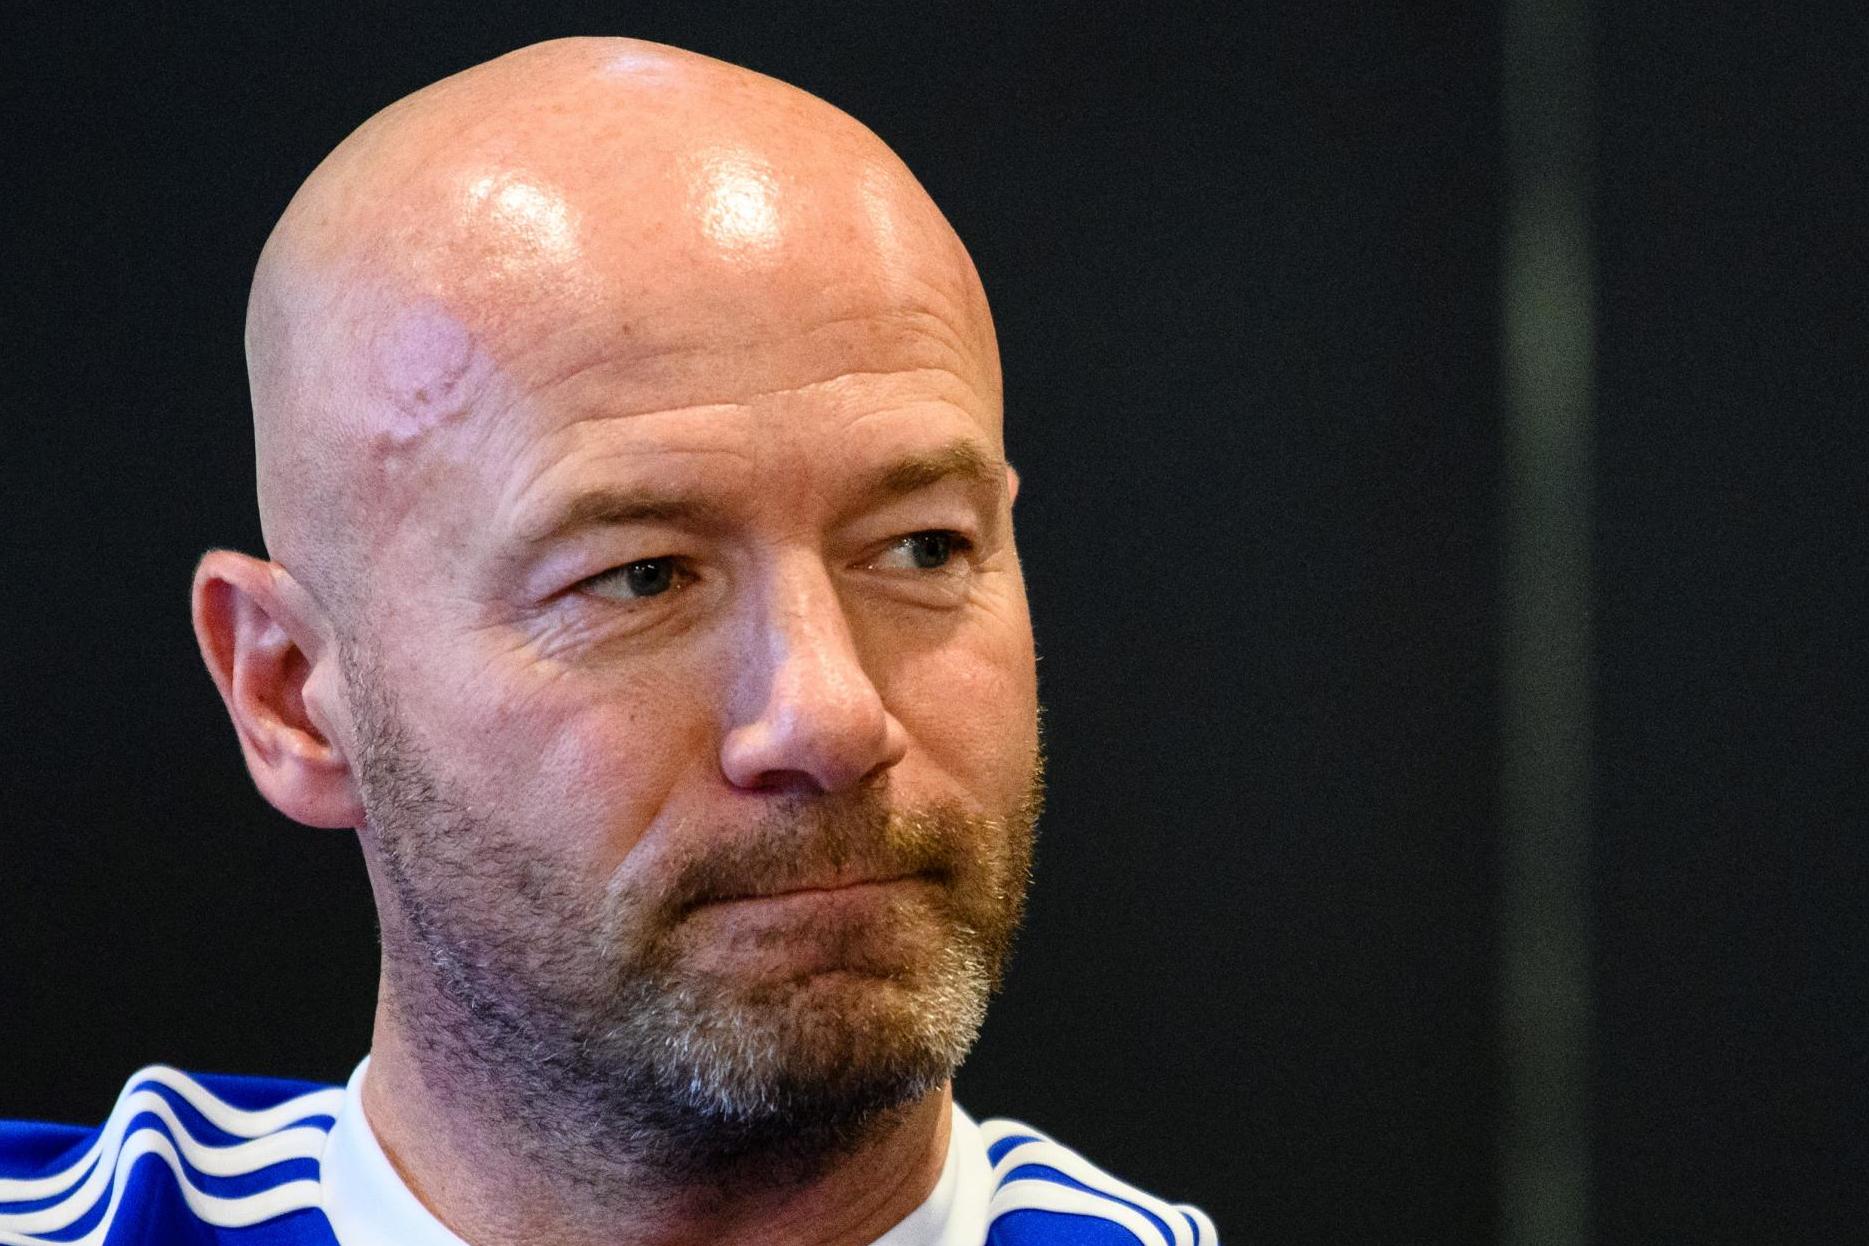 Alan Shearer news, breaking stories and comment